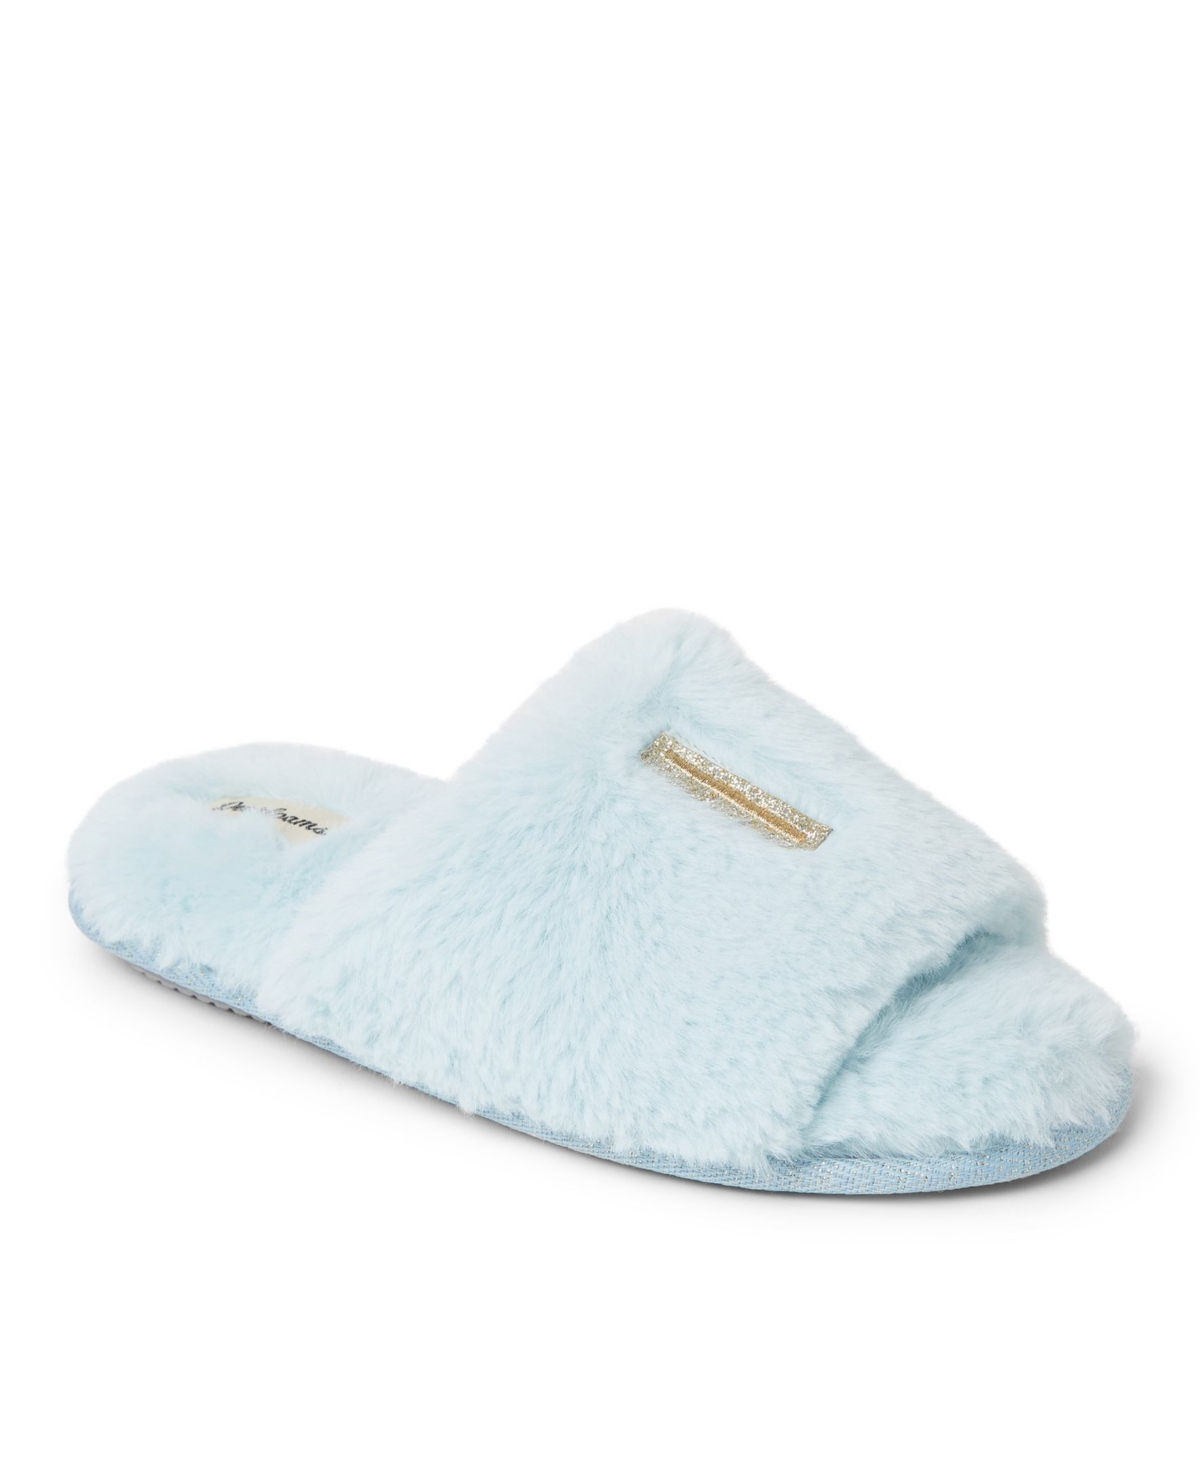 Bride and Bridesmaids Slide Slippers, Online Only - Frosted Plum